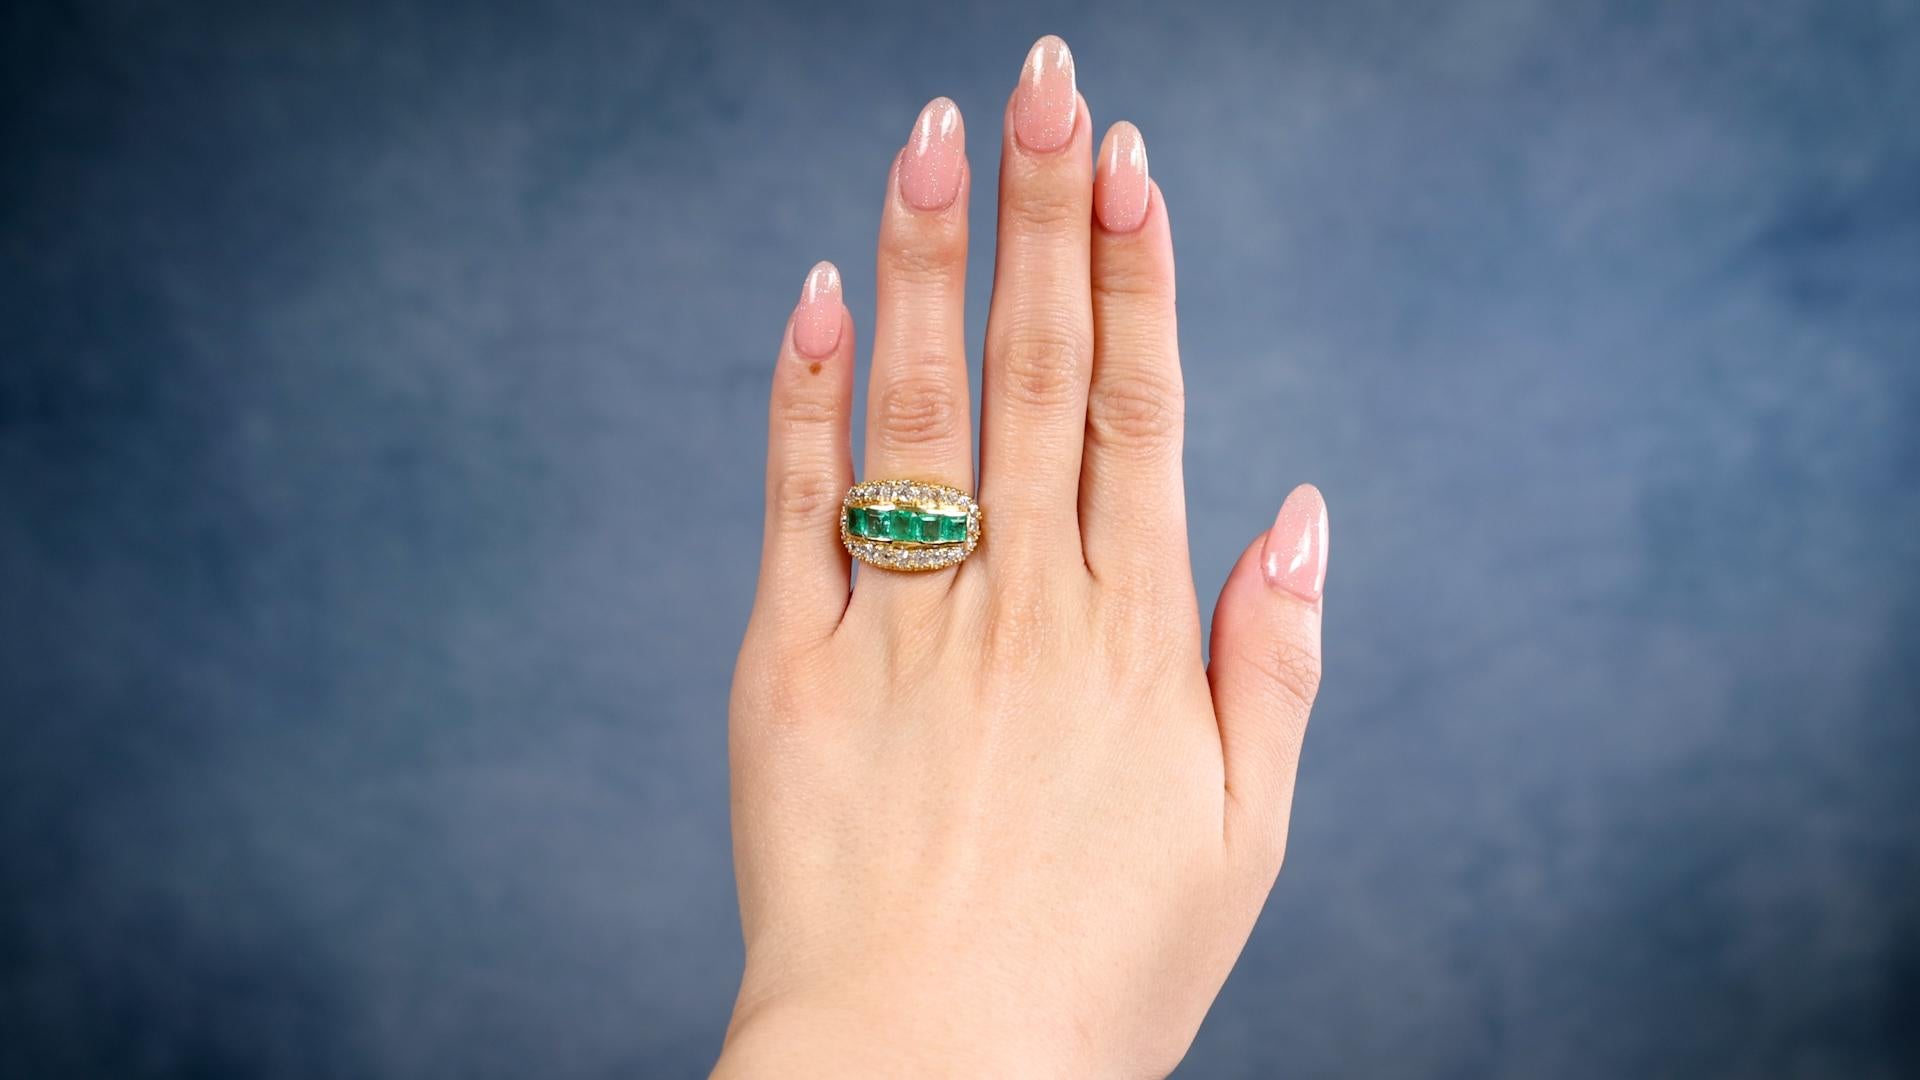 One Vintage Emerald Diamond 18k Yellow Gold Ring. Featuring five square step cut emeralds with a total weight of approximately 1.50 carats. Accented by 24 old European cut diamonds with a total weight of approximately 1.90 carats, graded colorless,